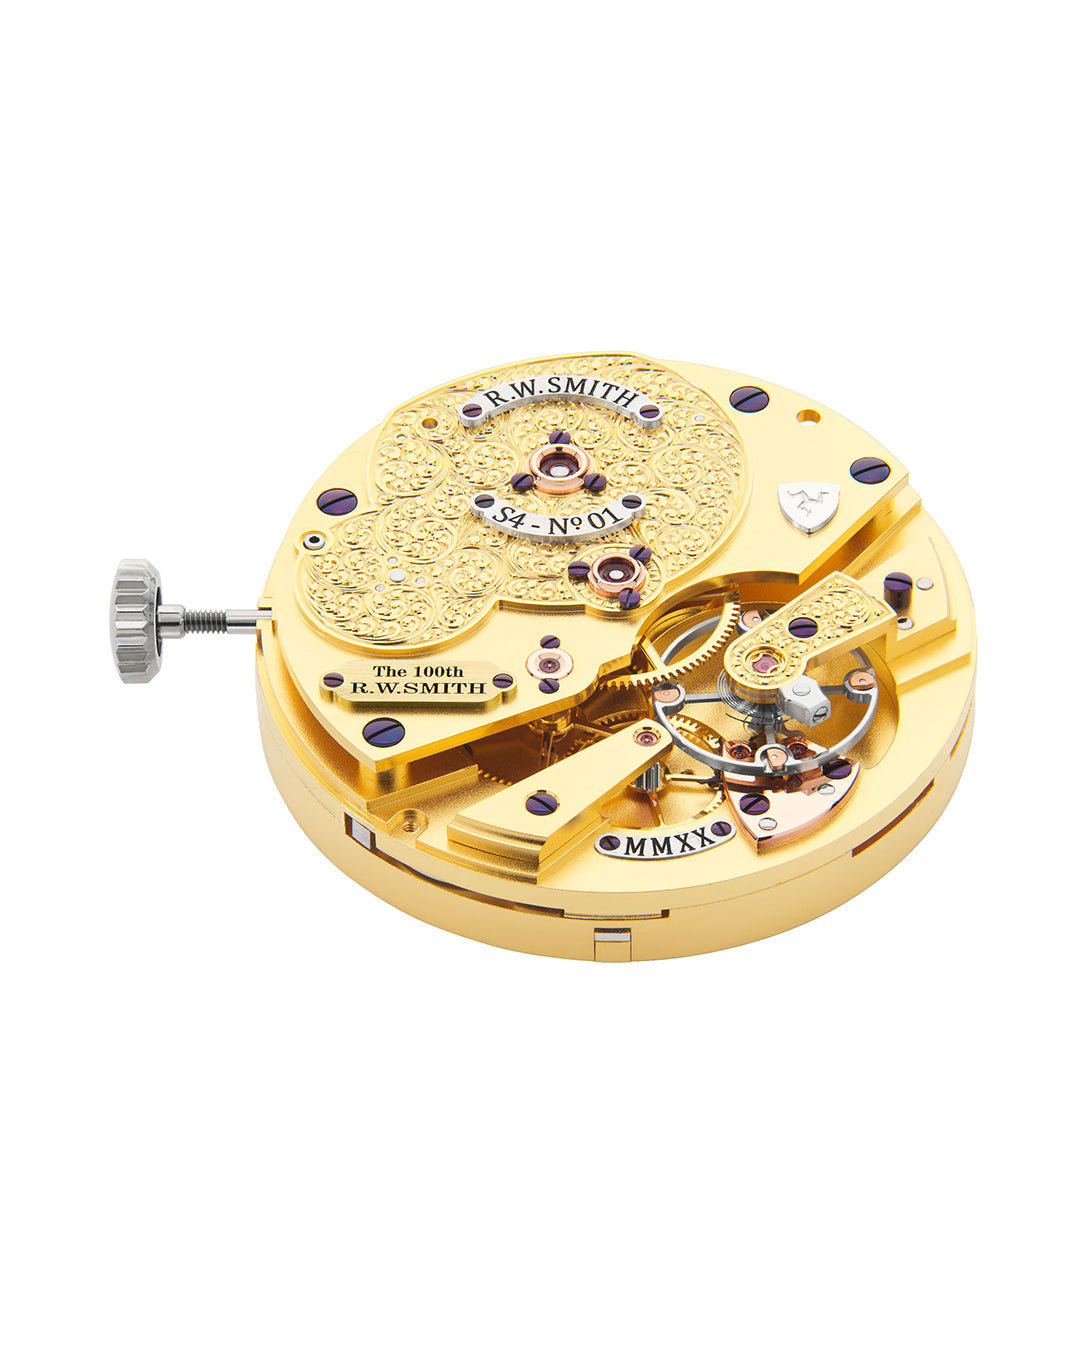 Roger W. Smith watchmaker Series 4 movement for A Collected Man London